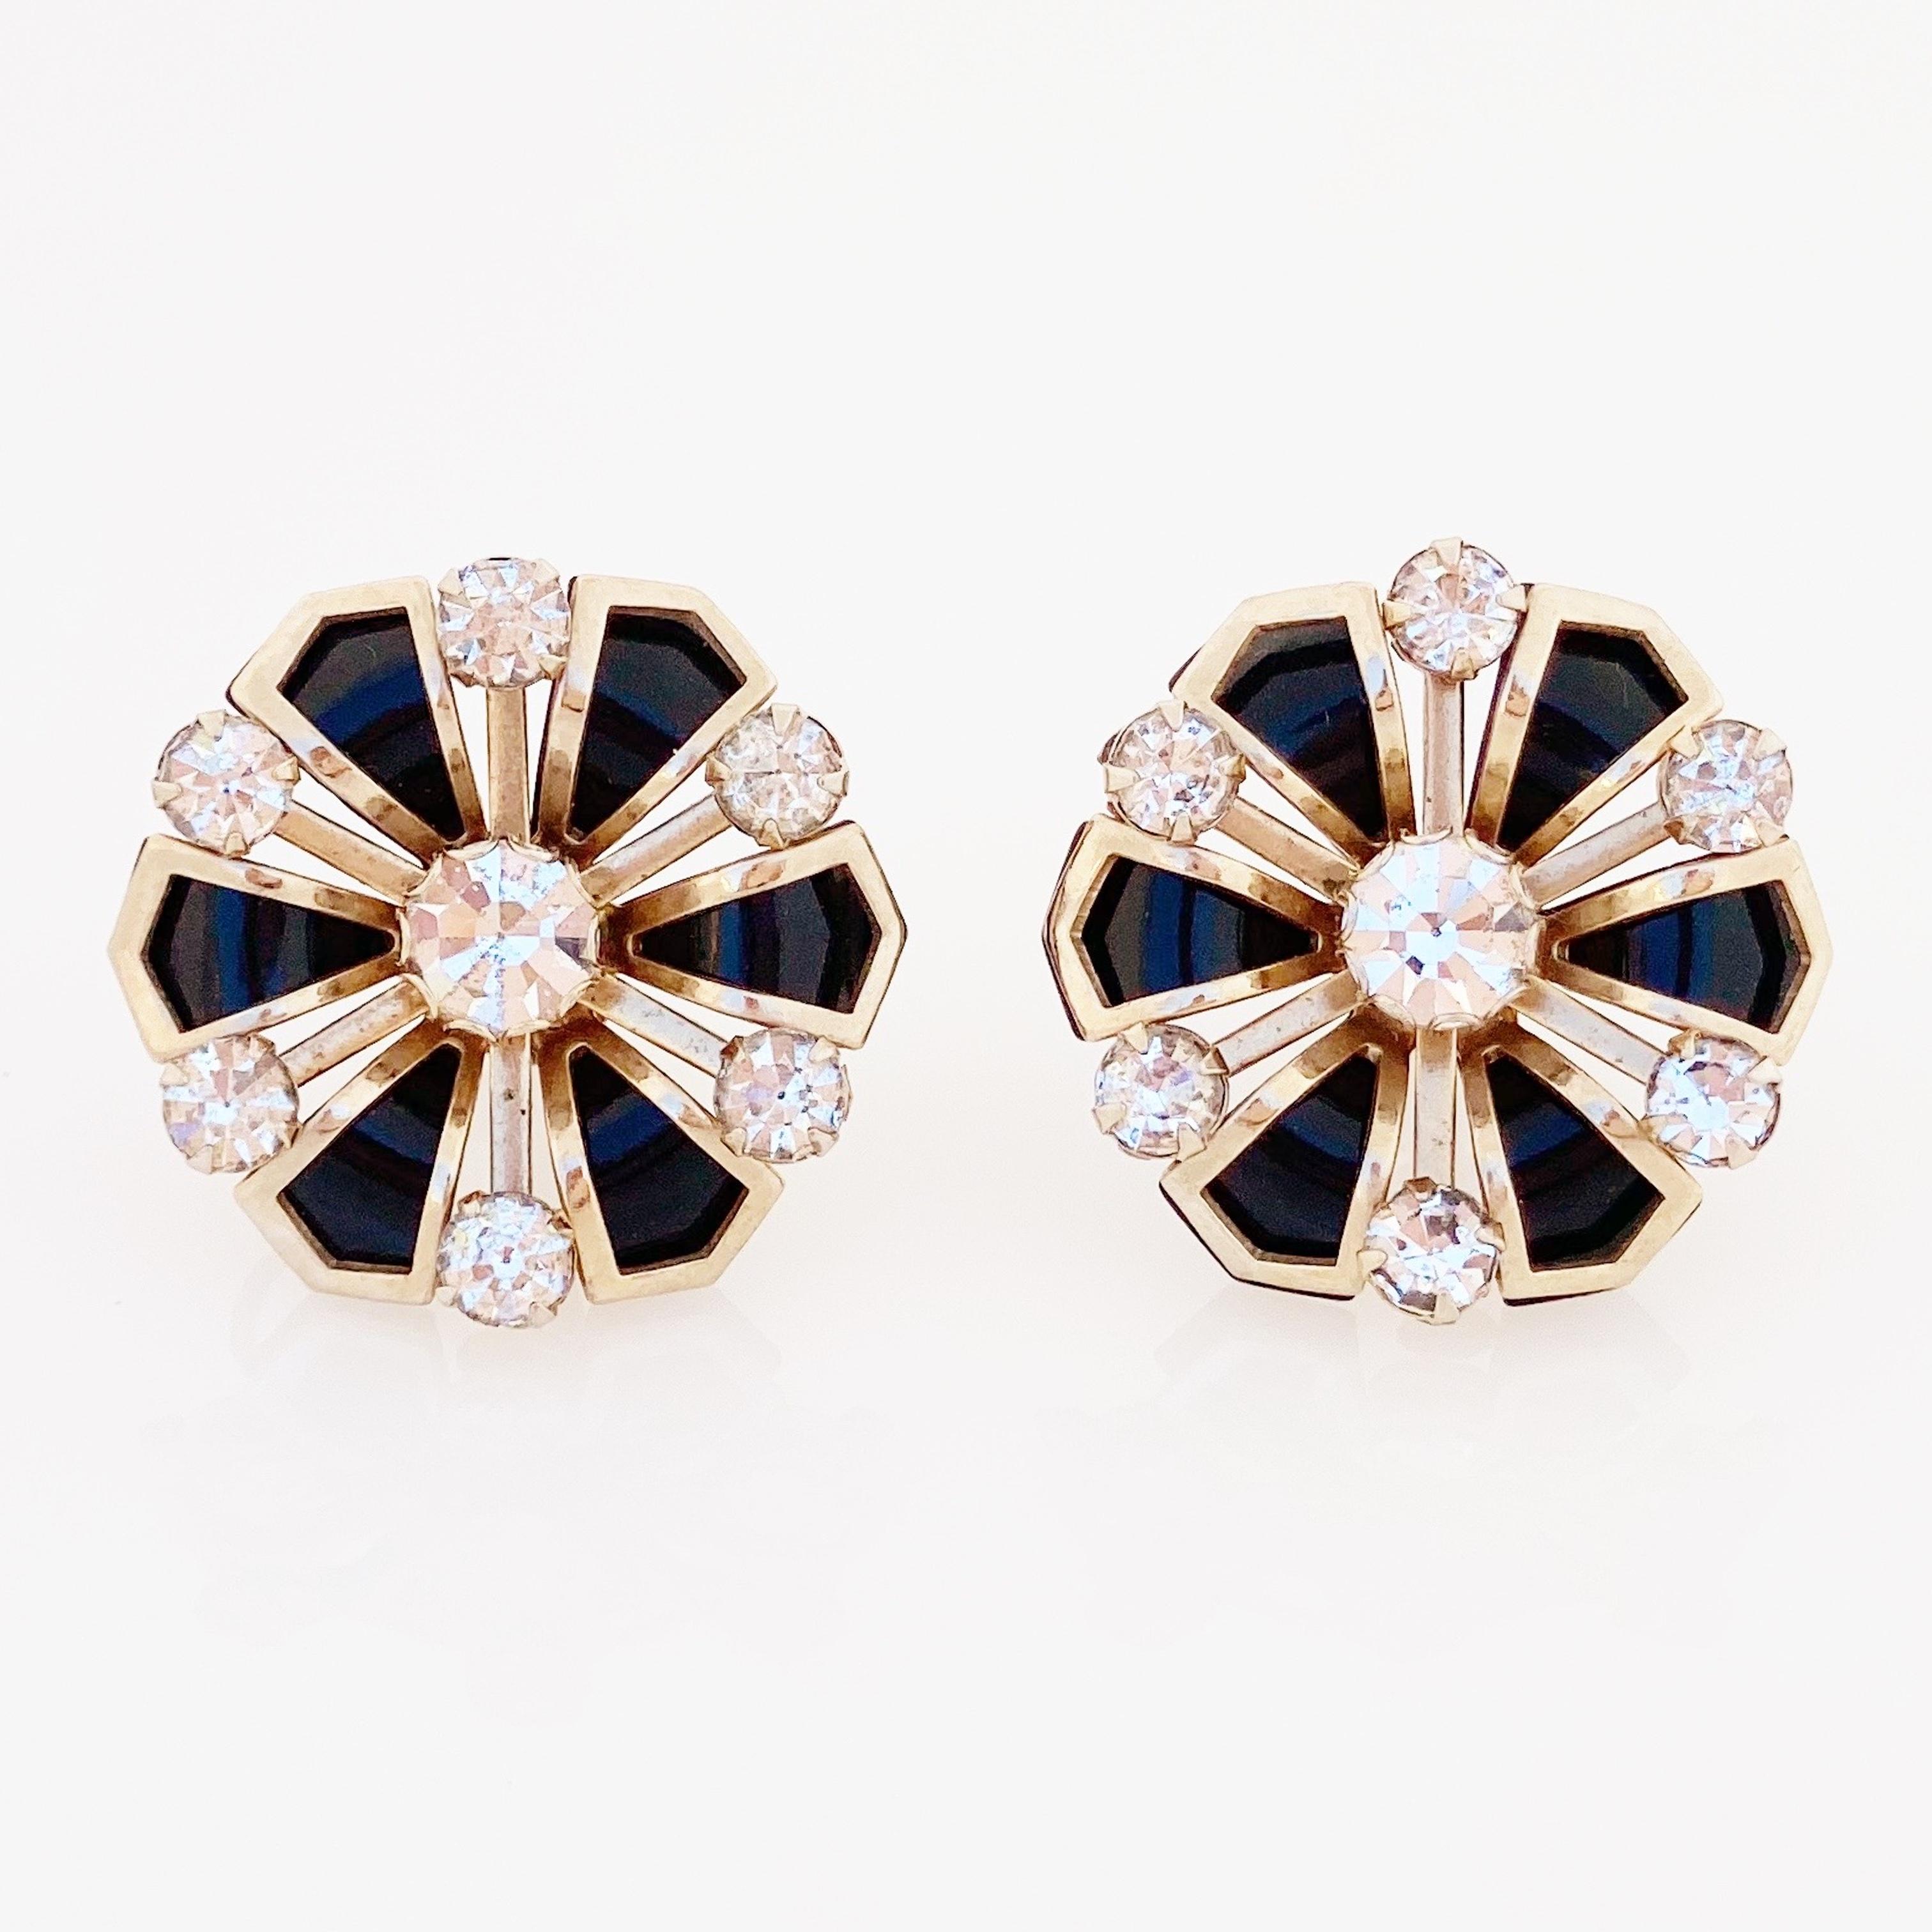 Modern Art Deco Style Black Flower Earrings With Rhinestone Accents, 1950s For Sale